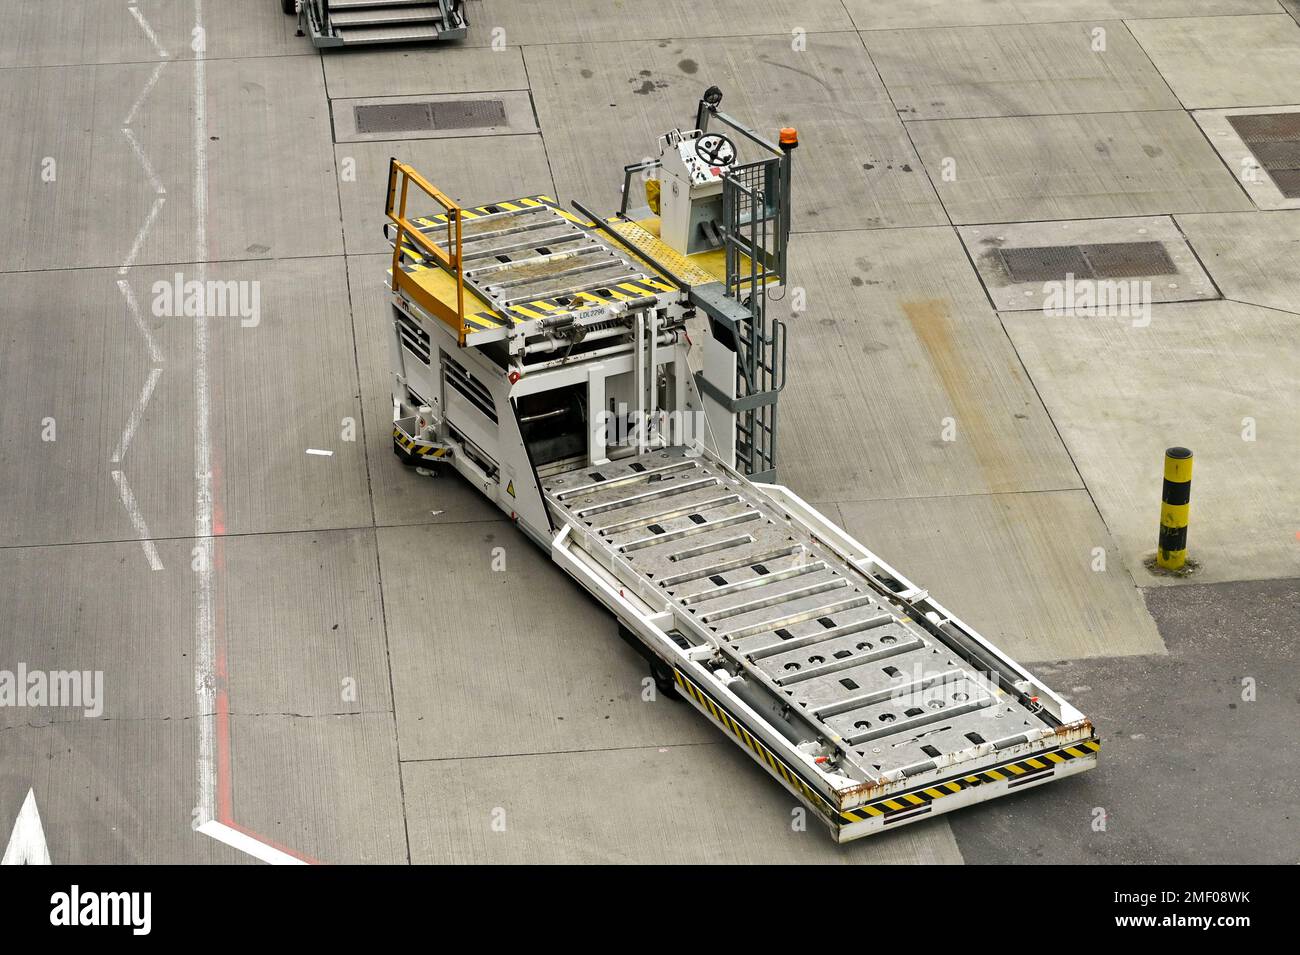 London, England - April 2022: Specialist airport vehicle for loading air freight pallets into aircraft Stock Photo